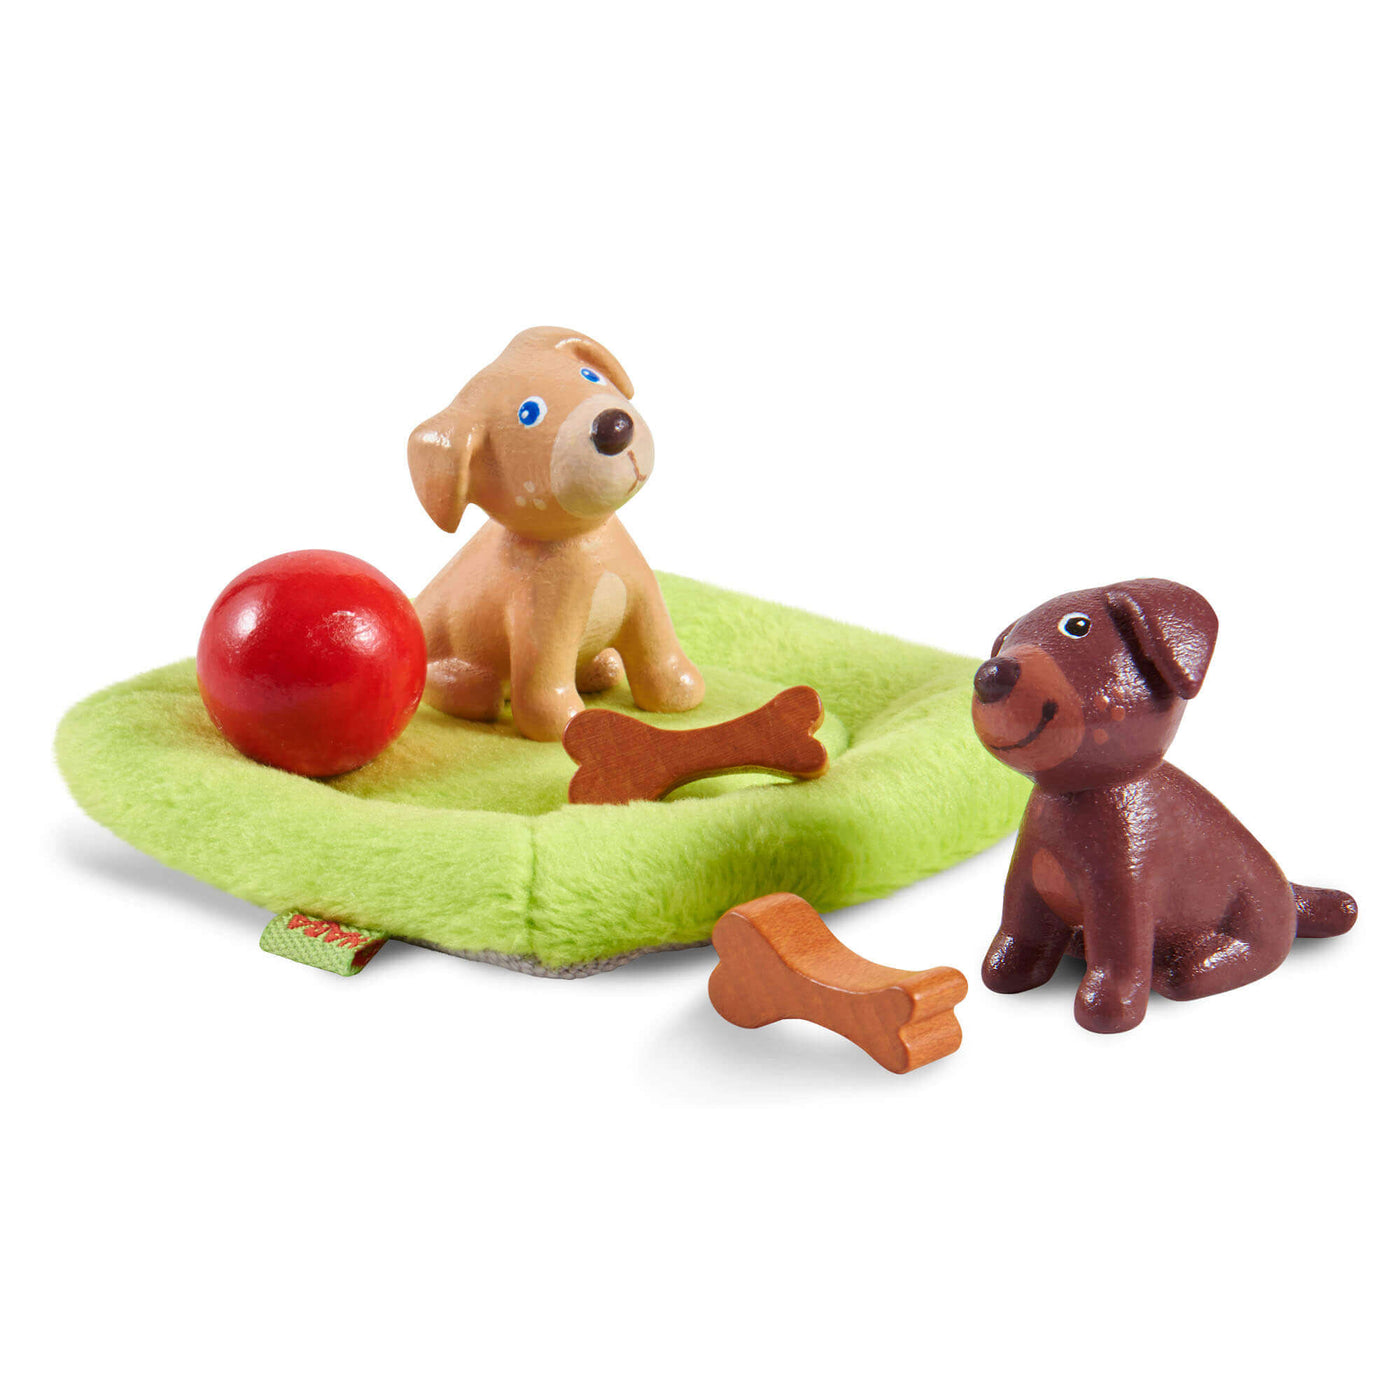 Little Friends Puppy Love Play Set with 2 puppies, 2 bones, red ball, and green bed